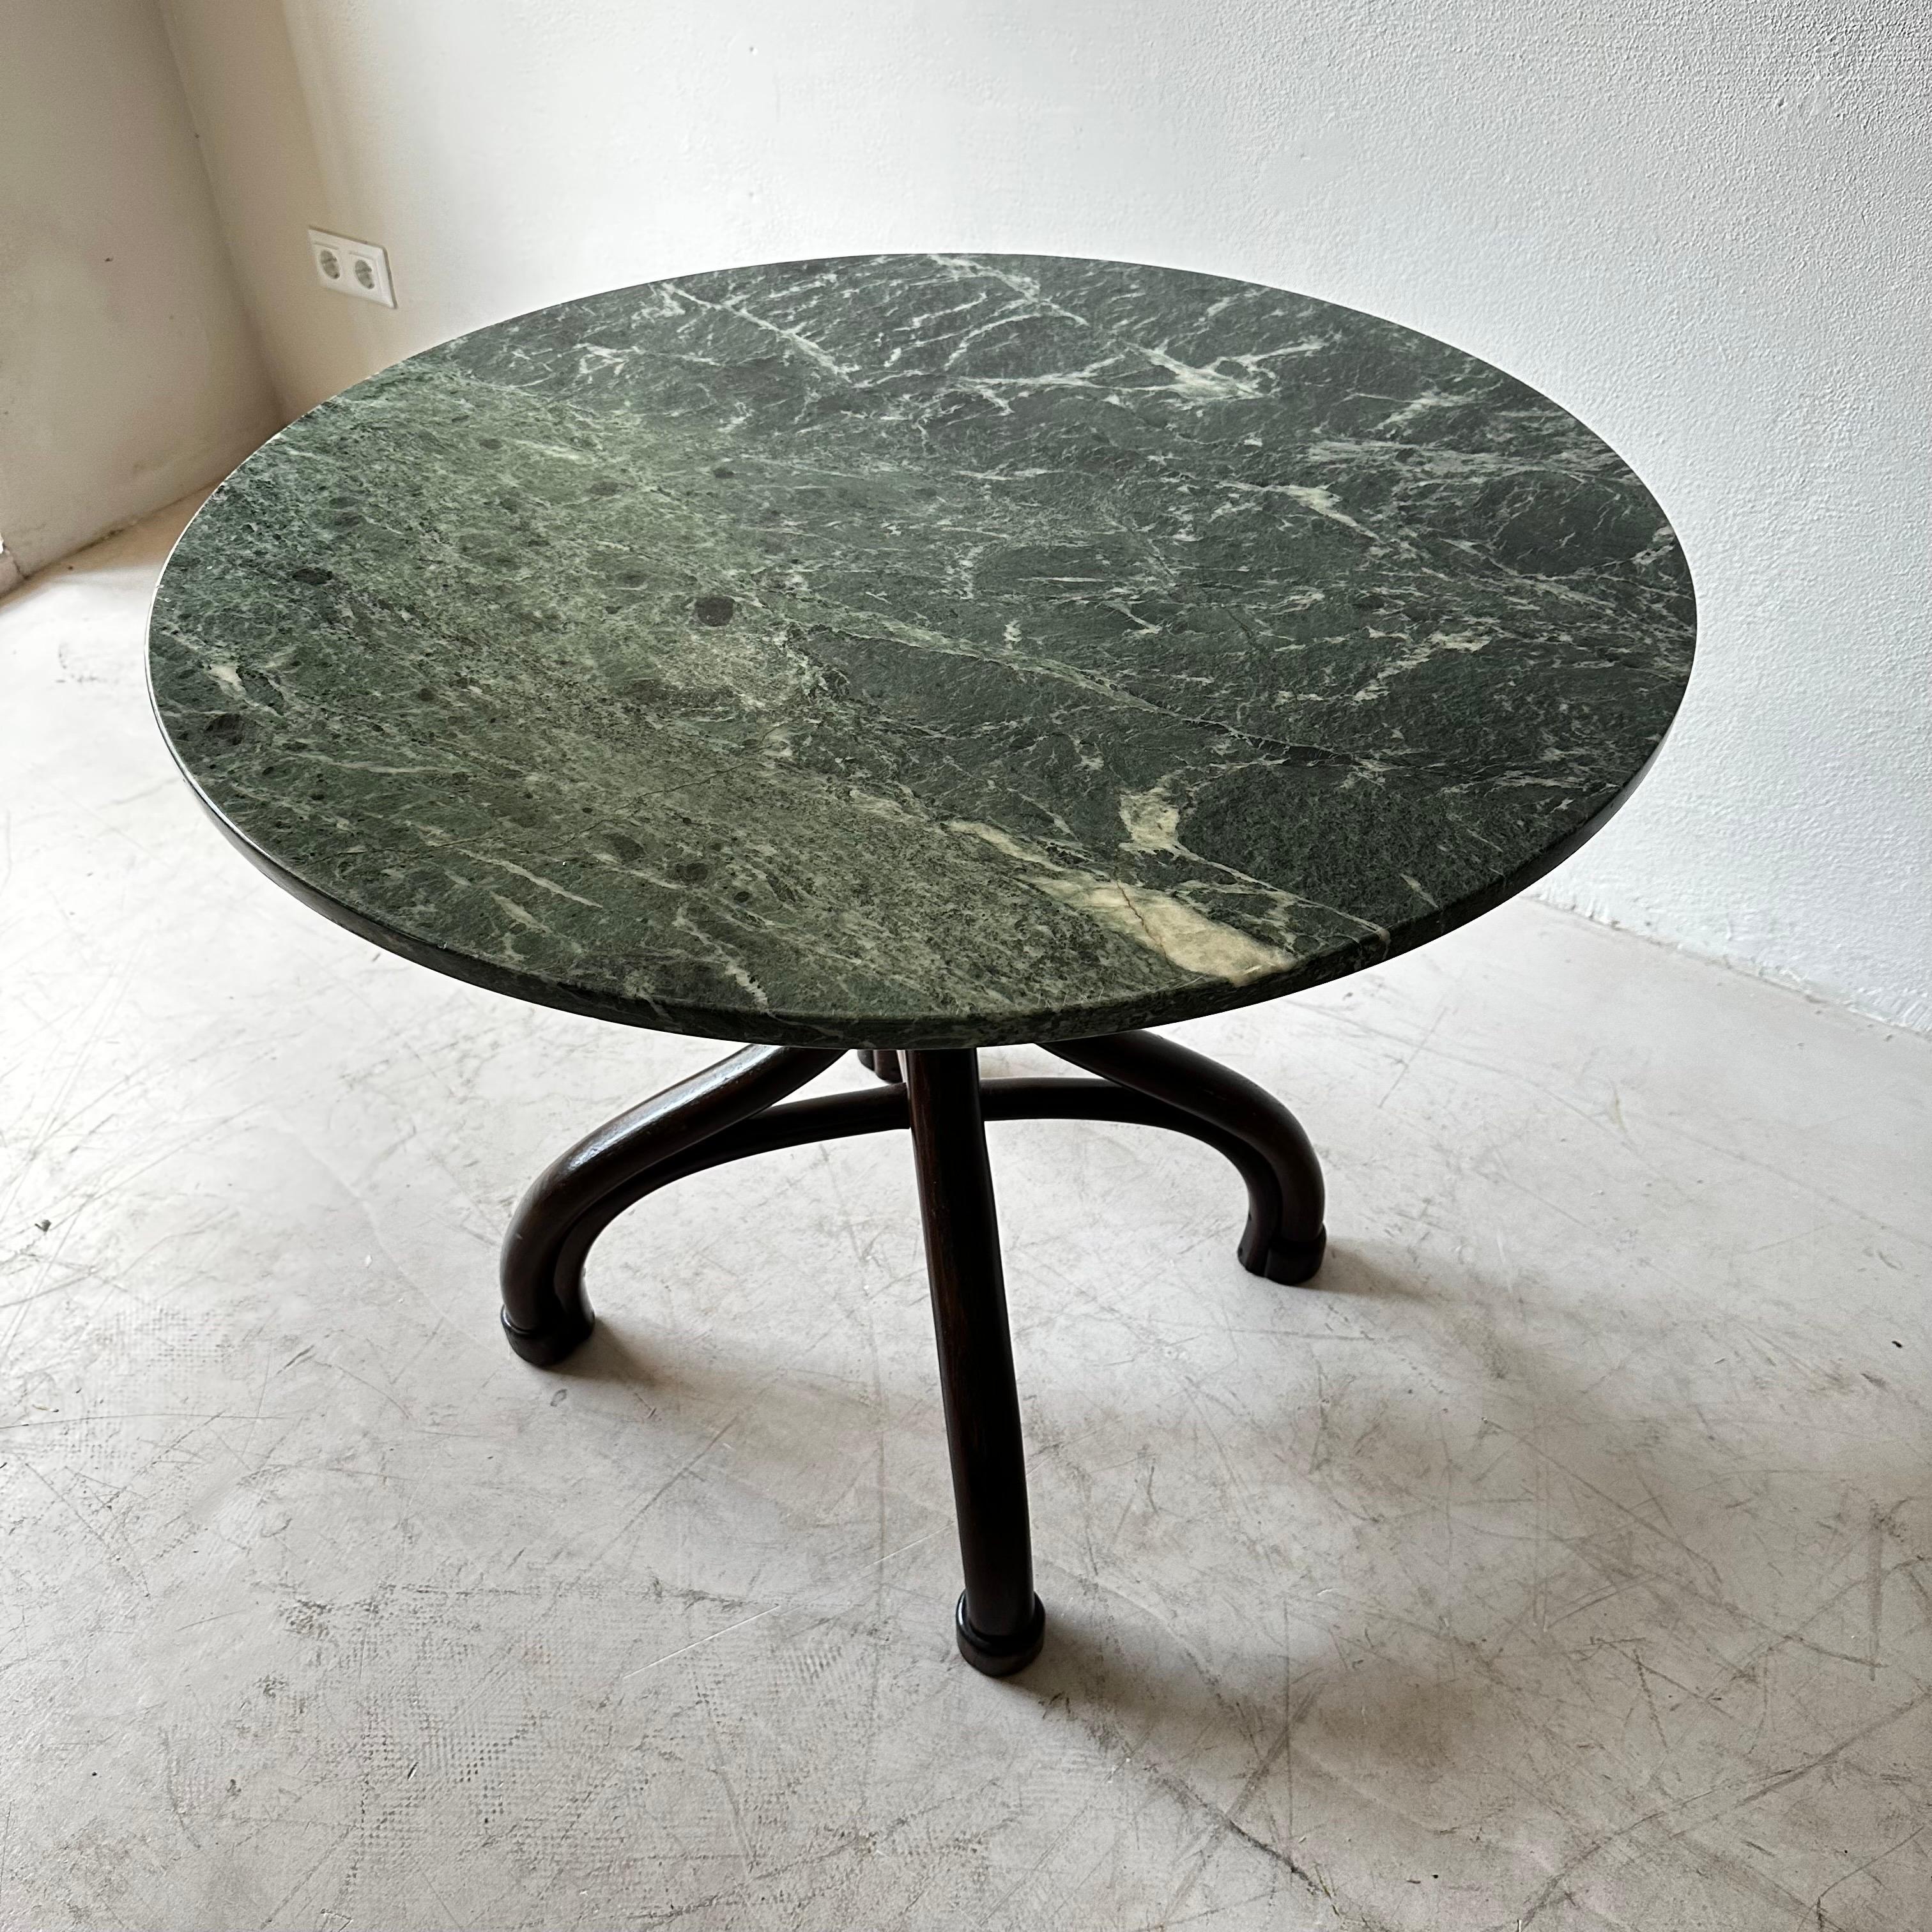 Early 20th Century Adolf Loos Cafe Museum Center Hall Table with Green Marble Top, Austria 1910 For Sale